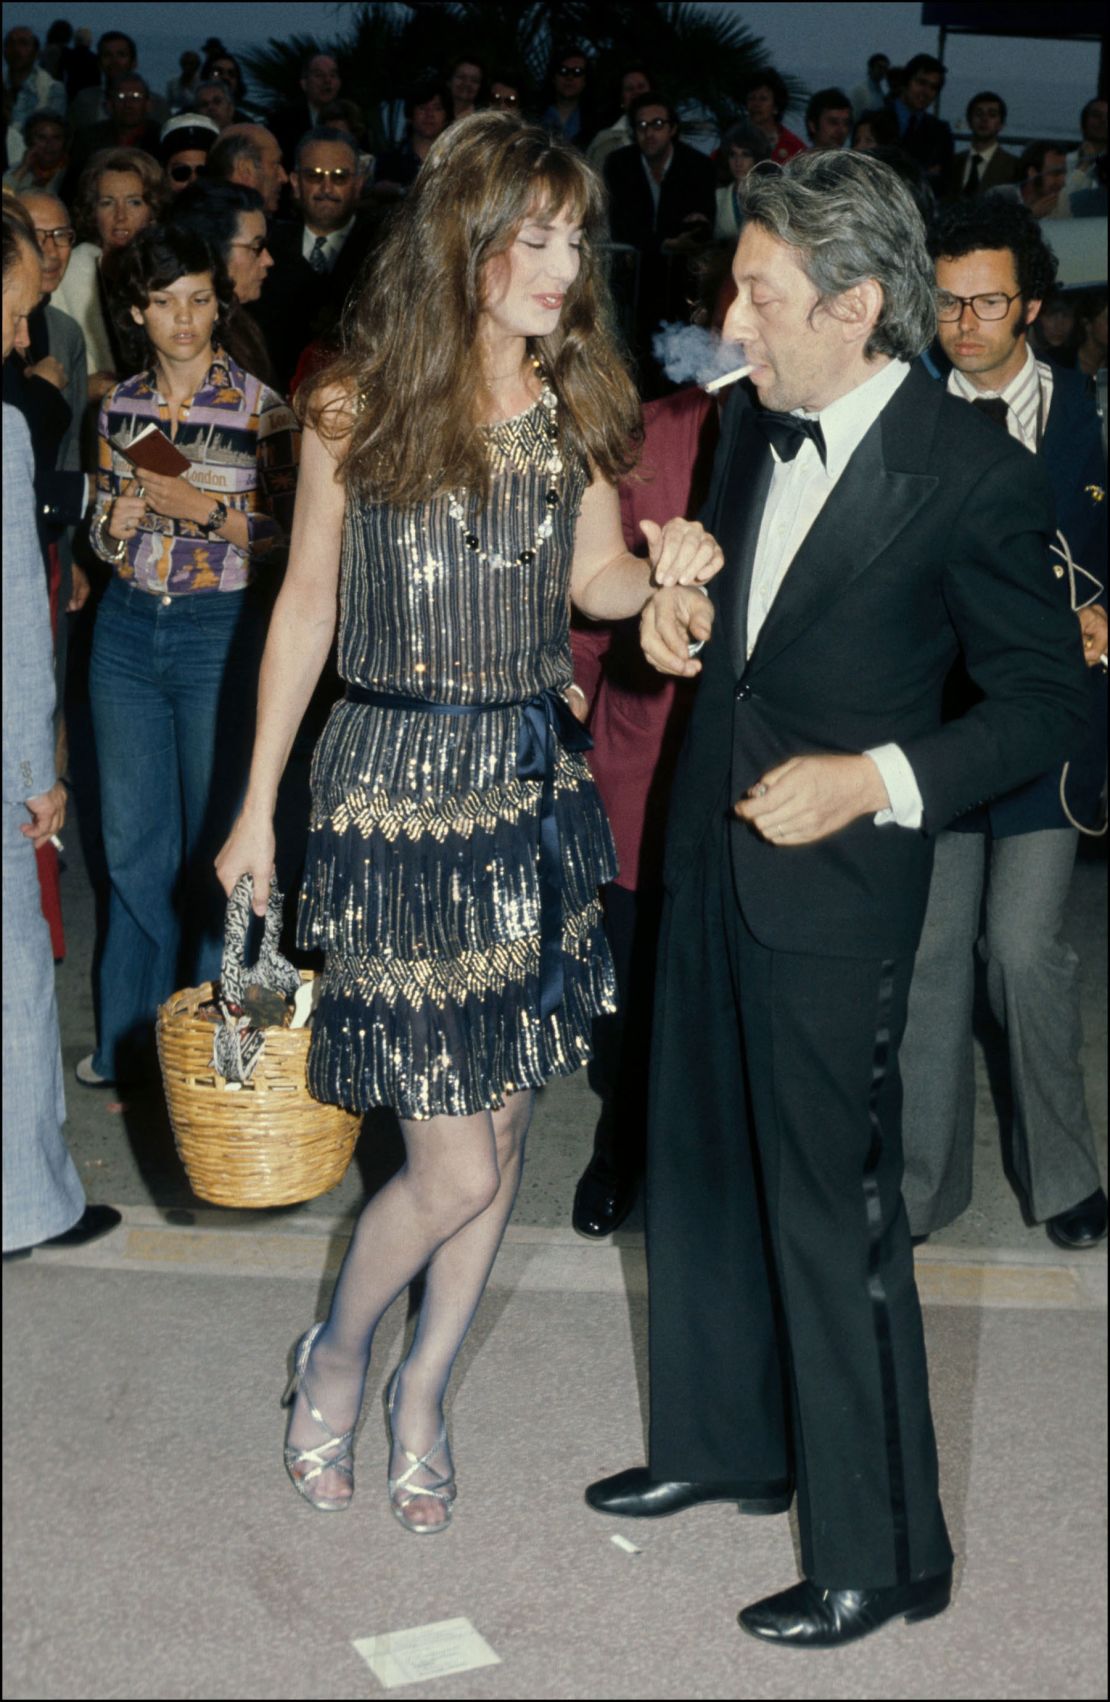 FRANCE - MAY 15:  Serge Gainsbourg and Jane Birkin at Cannes film festivals, France On May 15, 1974.  (Photo by GIRIBALDI/Gamma-Rapho via Getty Images)